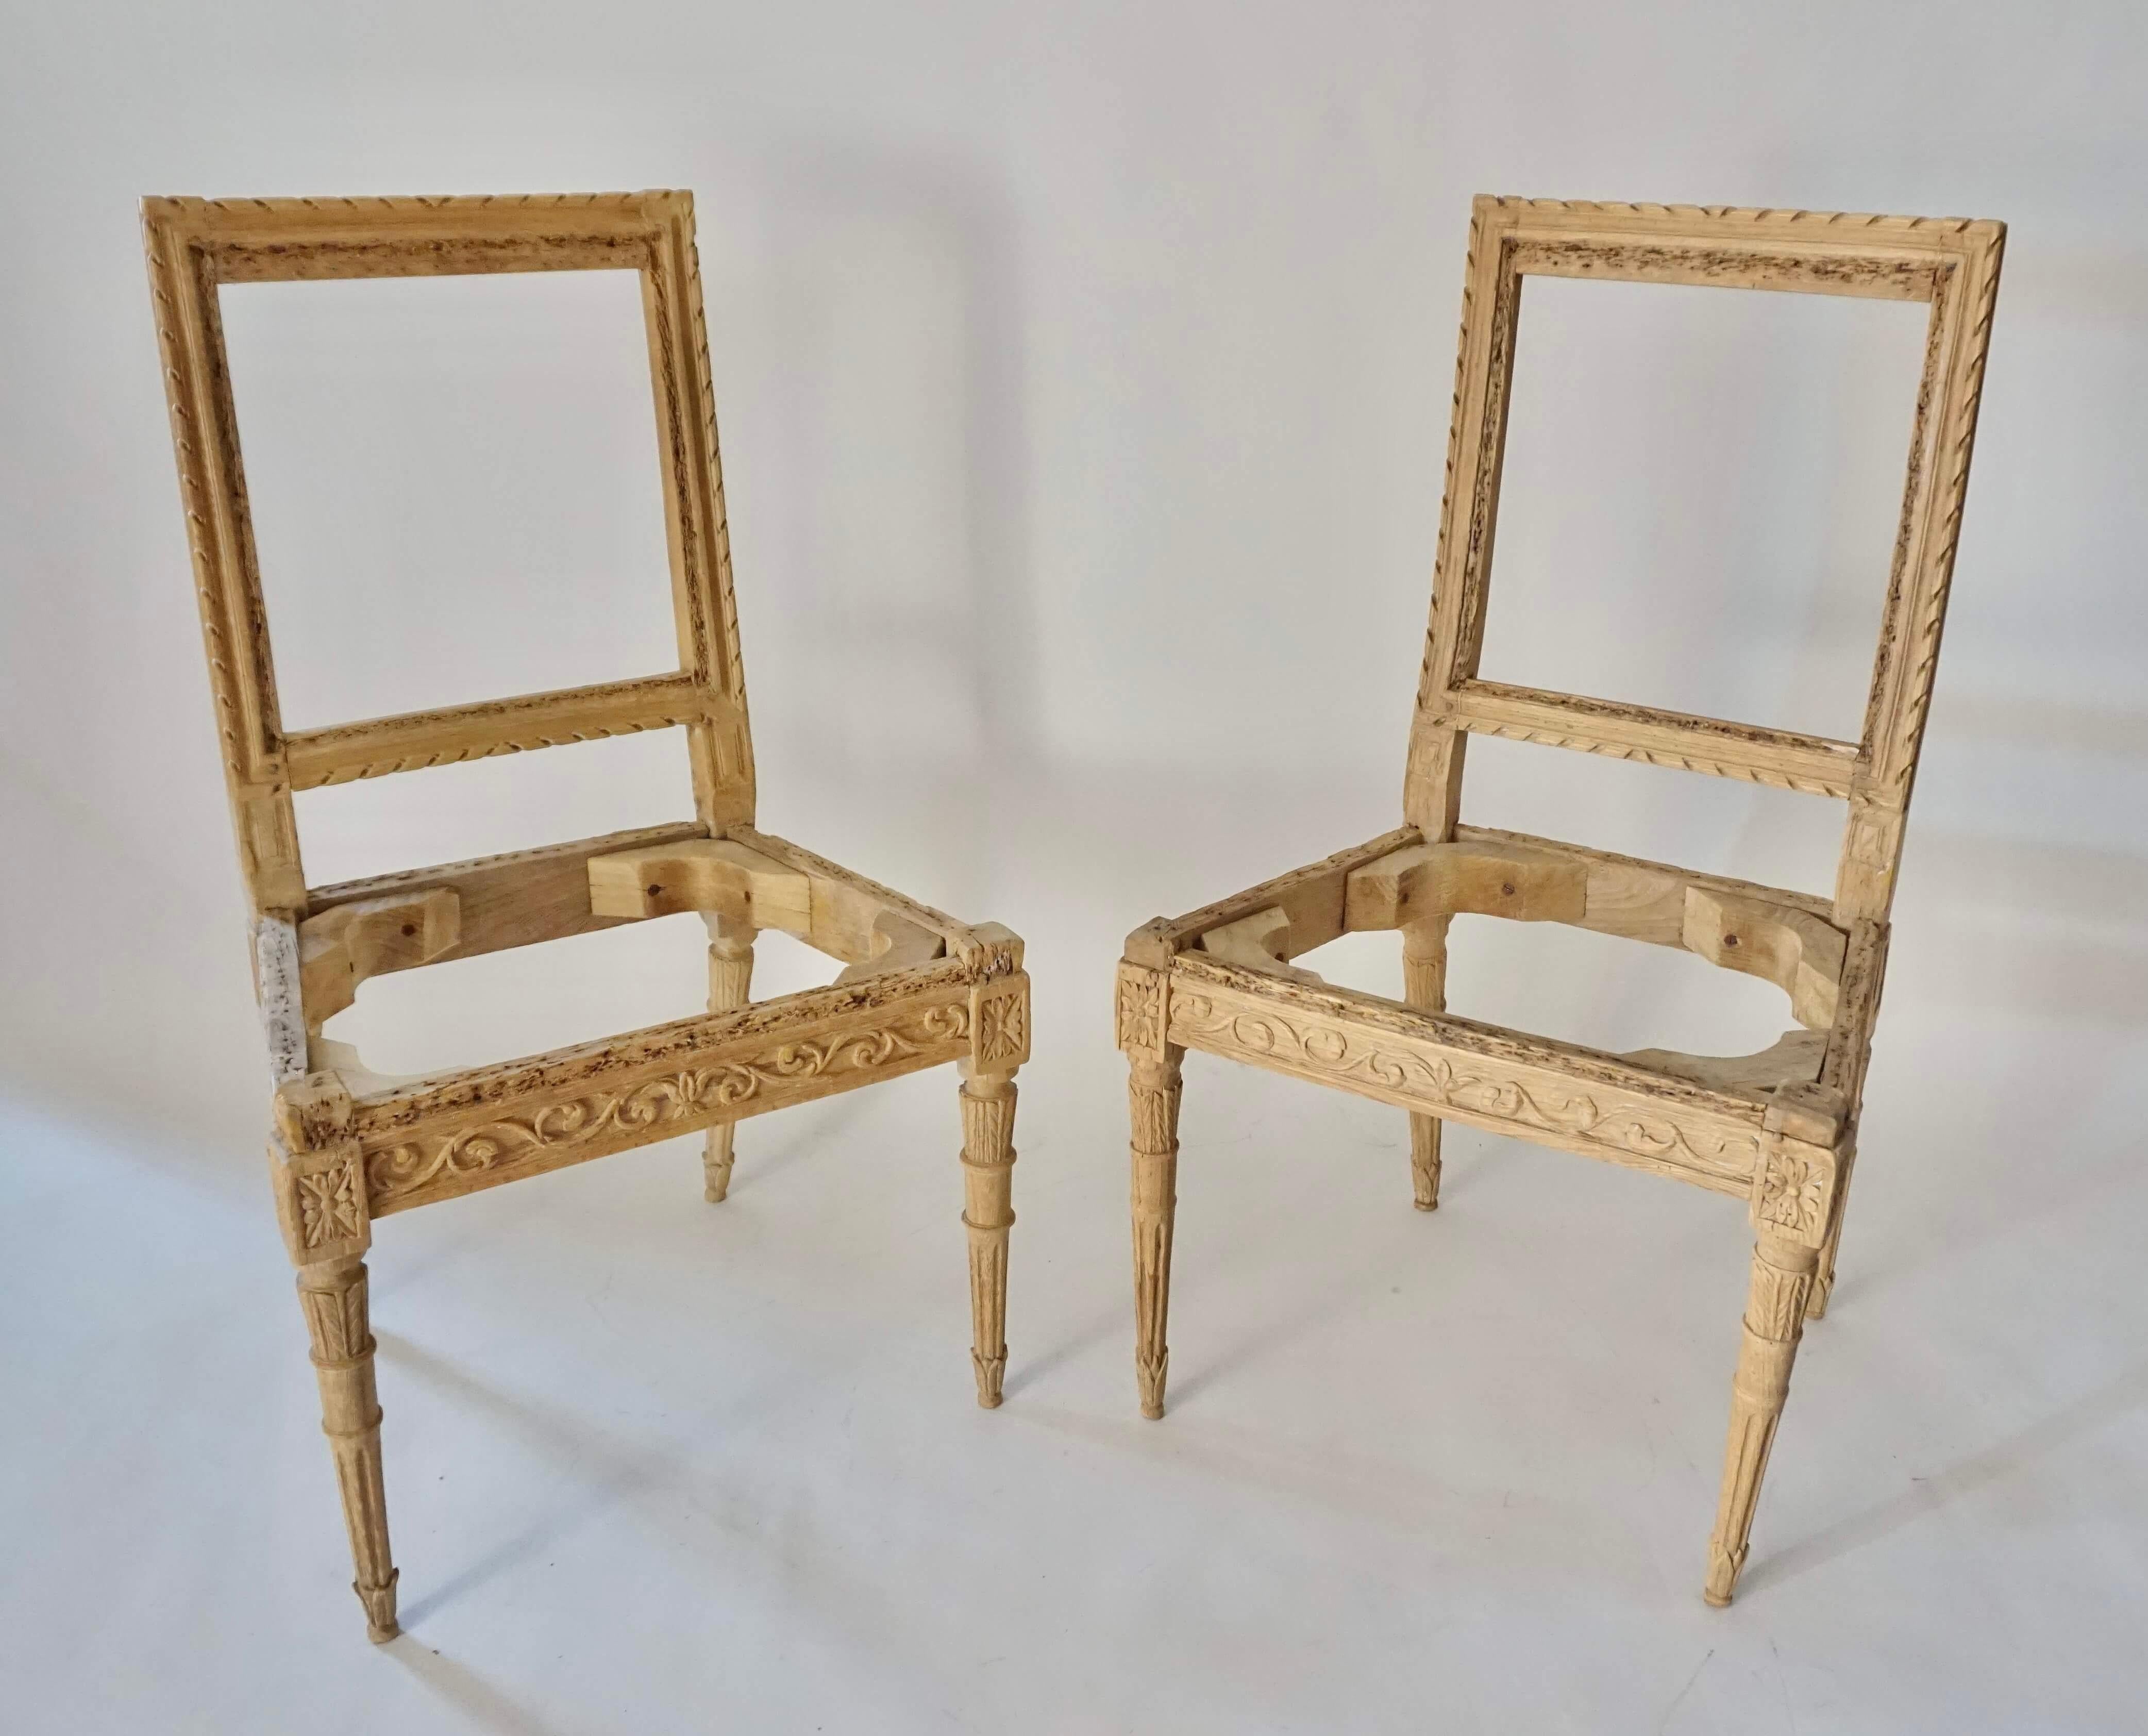 Chic pair of last quarter 18th century Italian neoclassical Louis XVI style side chairs having carved, waxed fruitwood frames; the rectangular backs with twisted-rope borders connecting trapezoidal form seats having foliate rinceau rails on